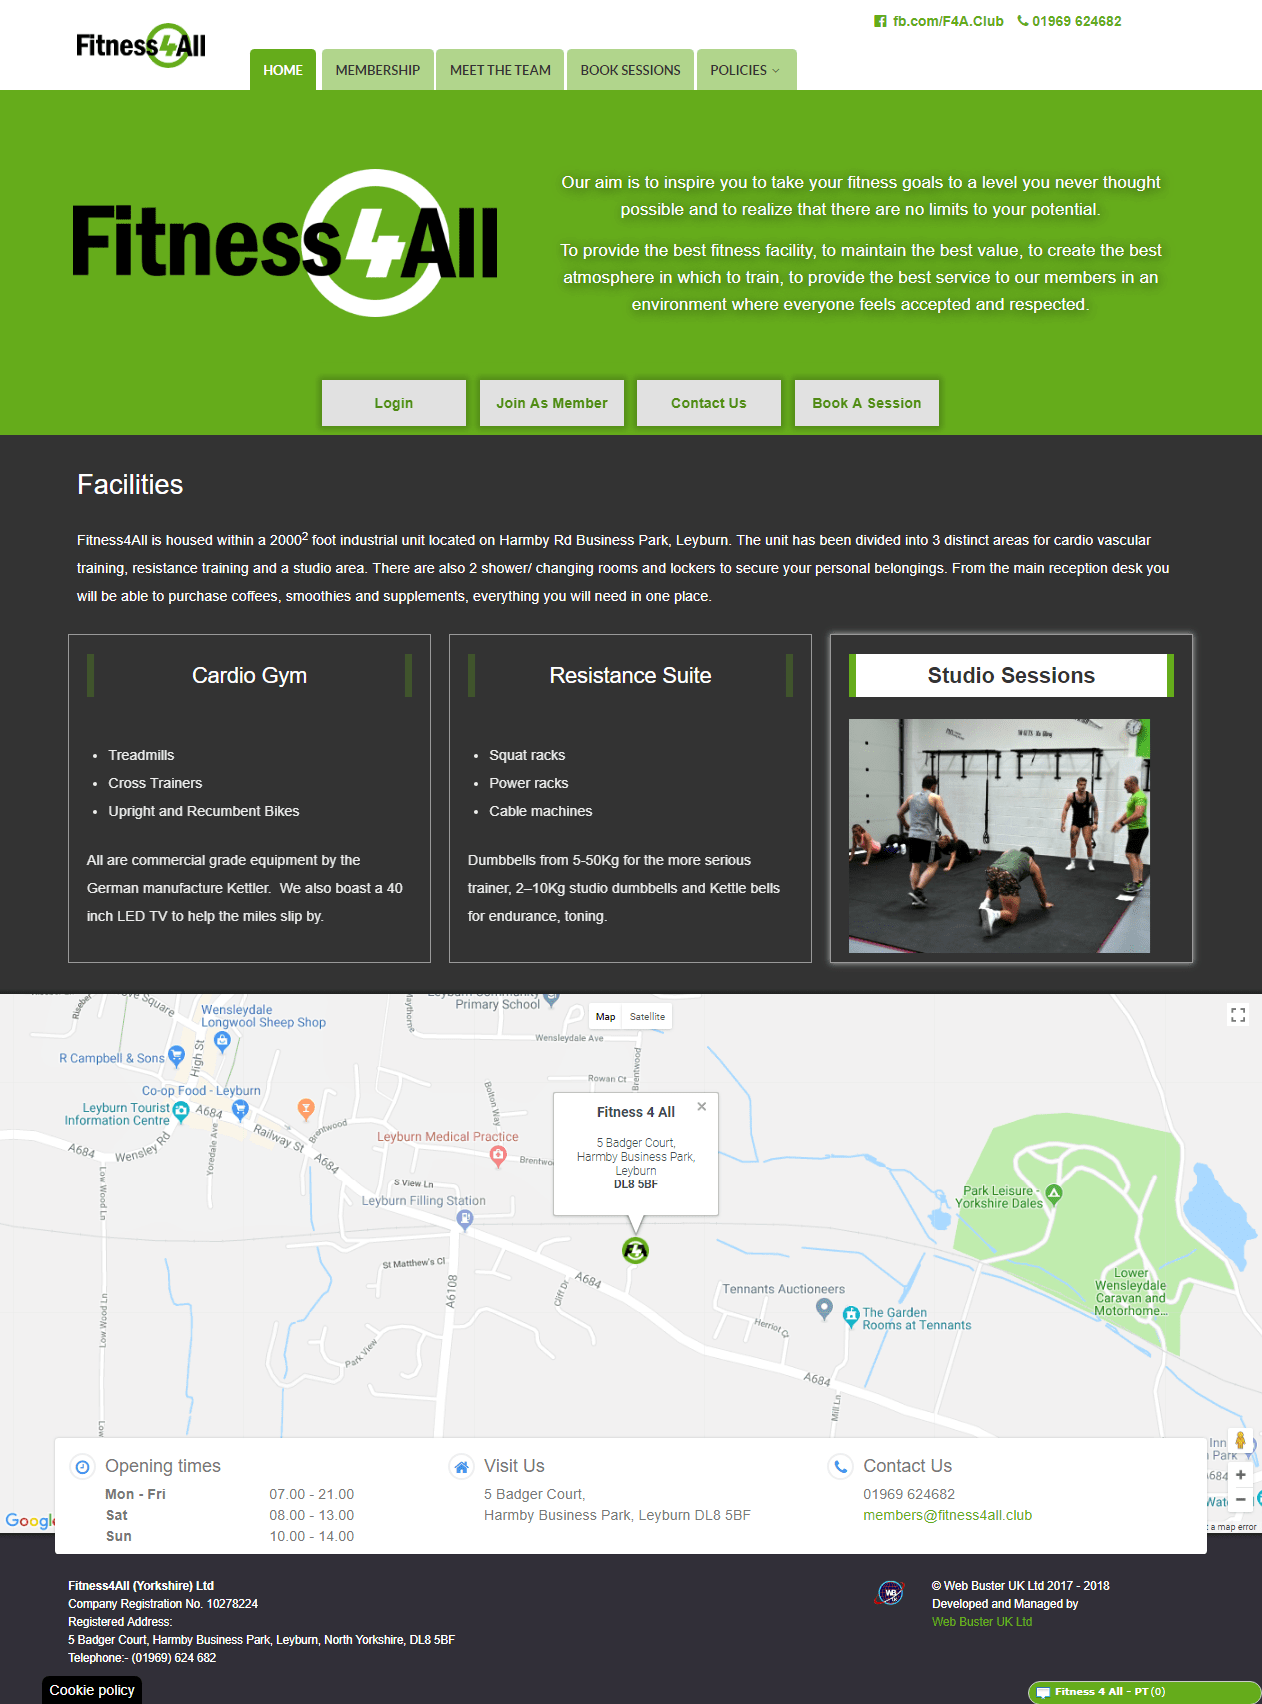 Fitness 4 All